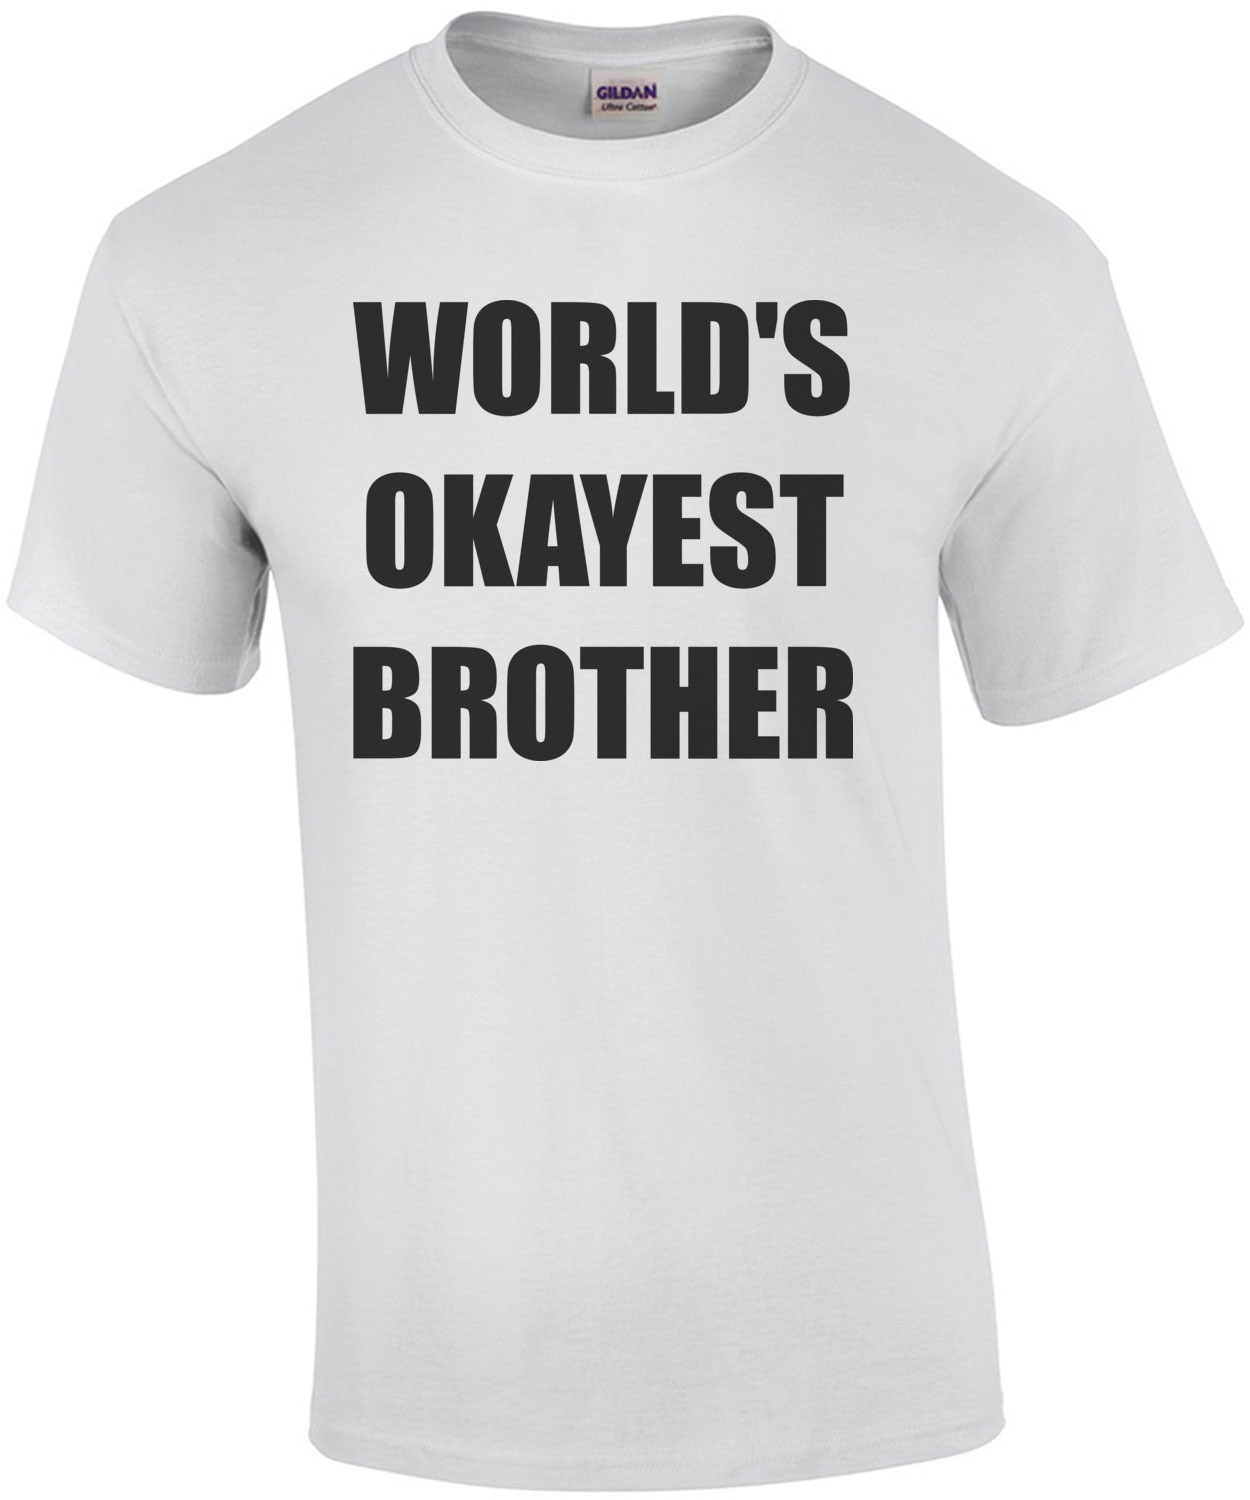 WORLD'S OKAYEST BROTHER Shirt